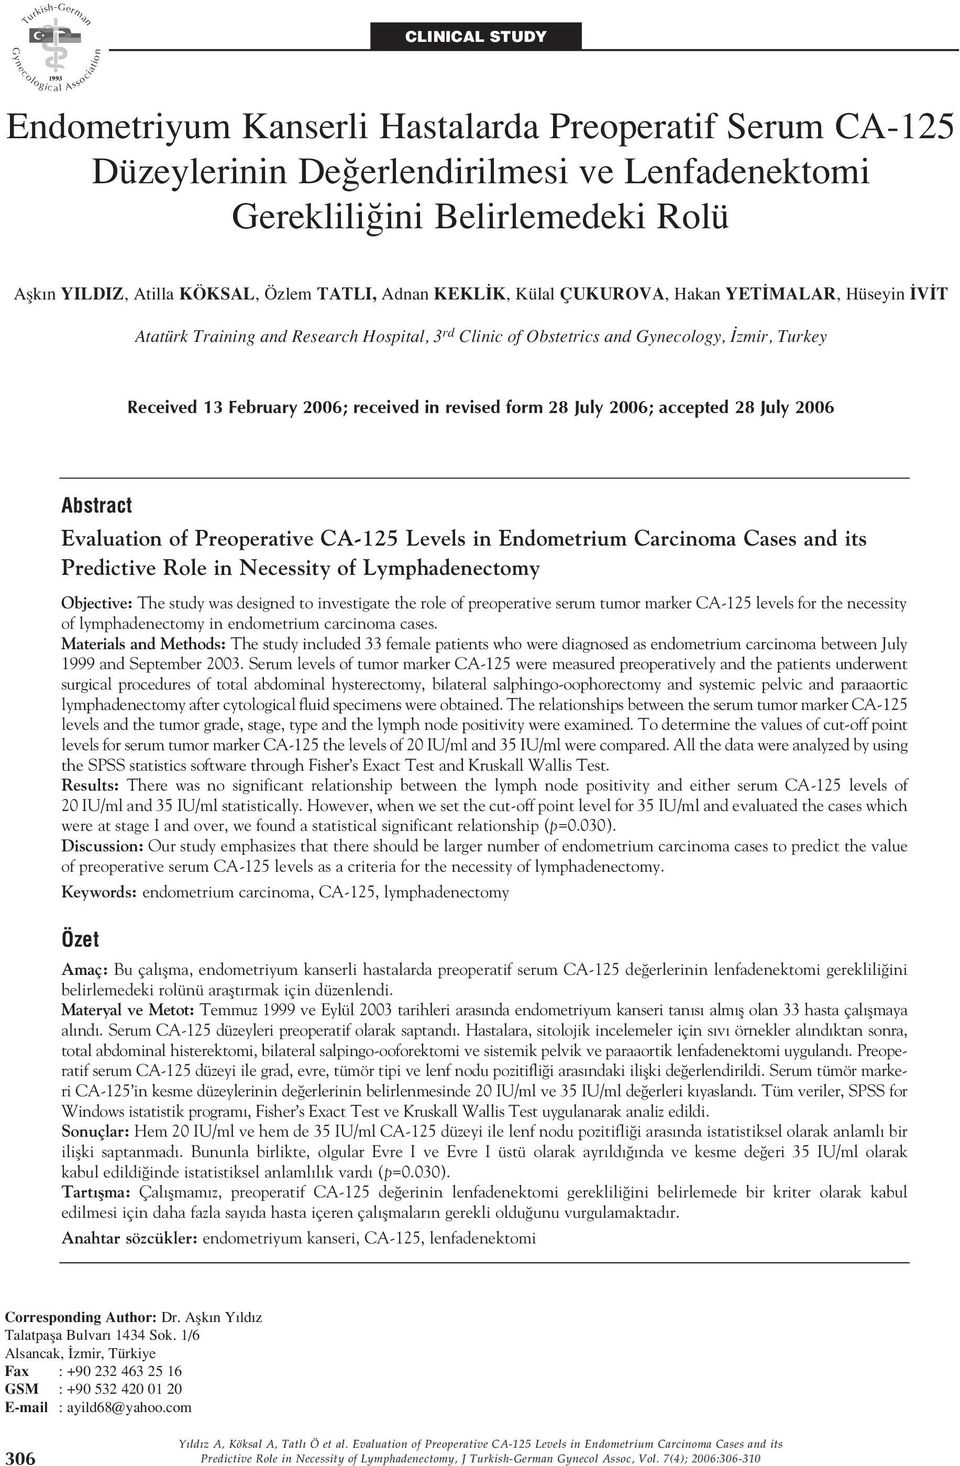 revised form 28 July 2006; accepted 28 July 2006 Abstract Evaluation of Preoperative CA-125 Levels in Endometrium Carcinoma Cases and its Predictive Role in Necessity of Lymphadenectomy Objective: